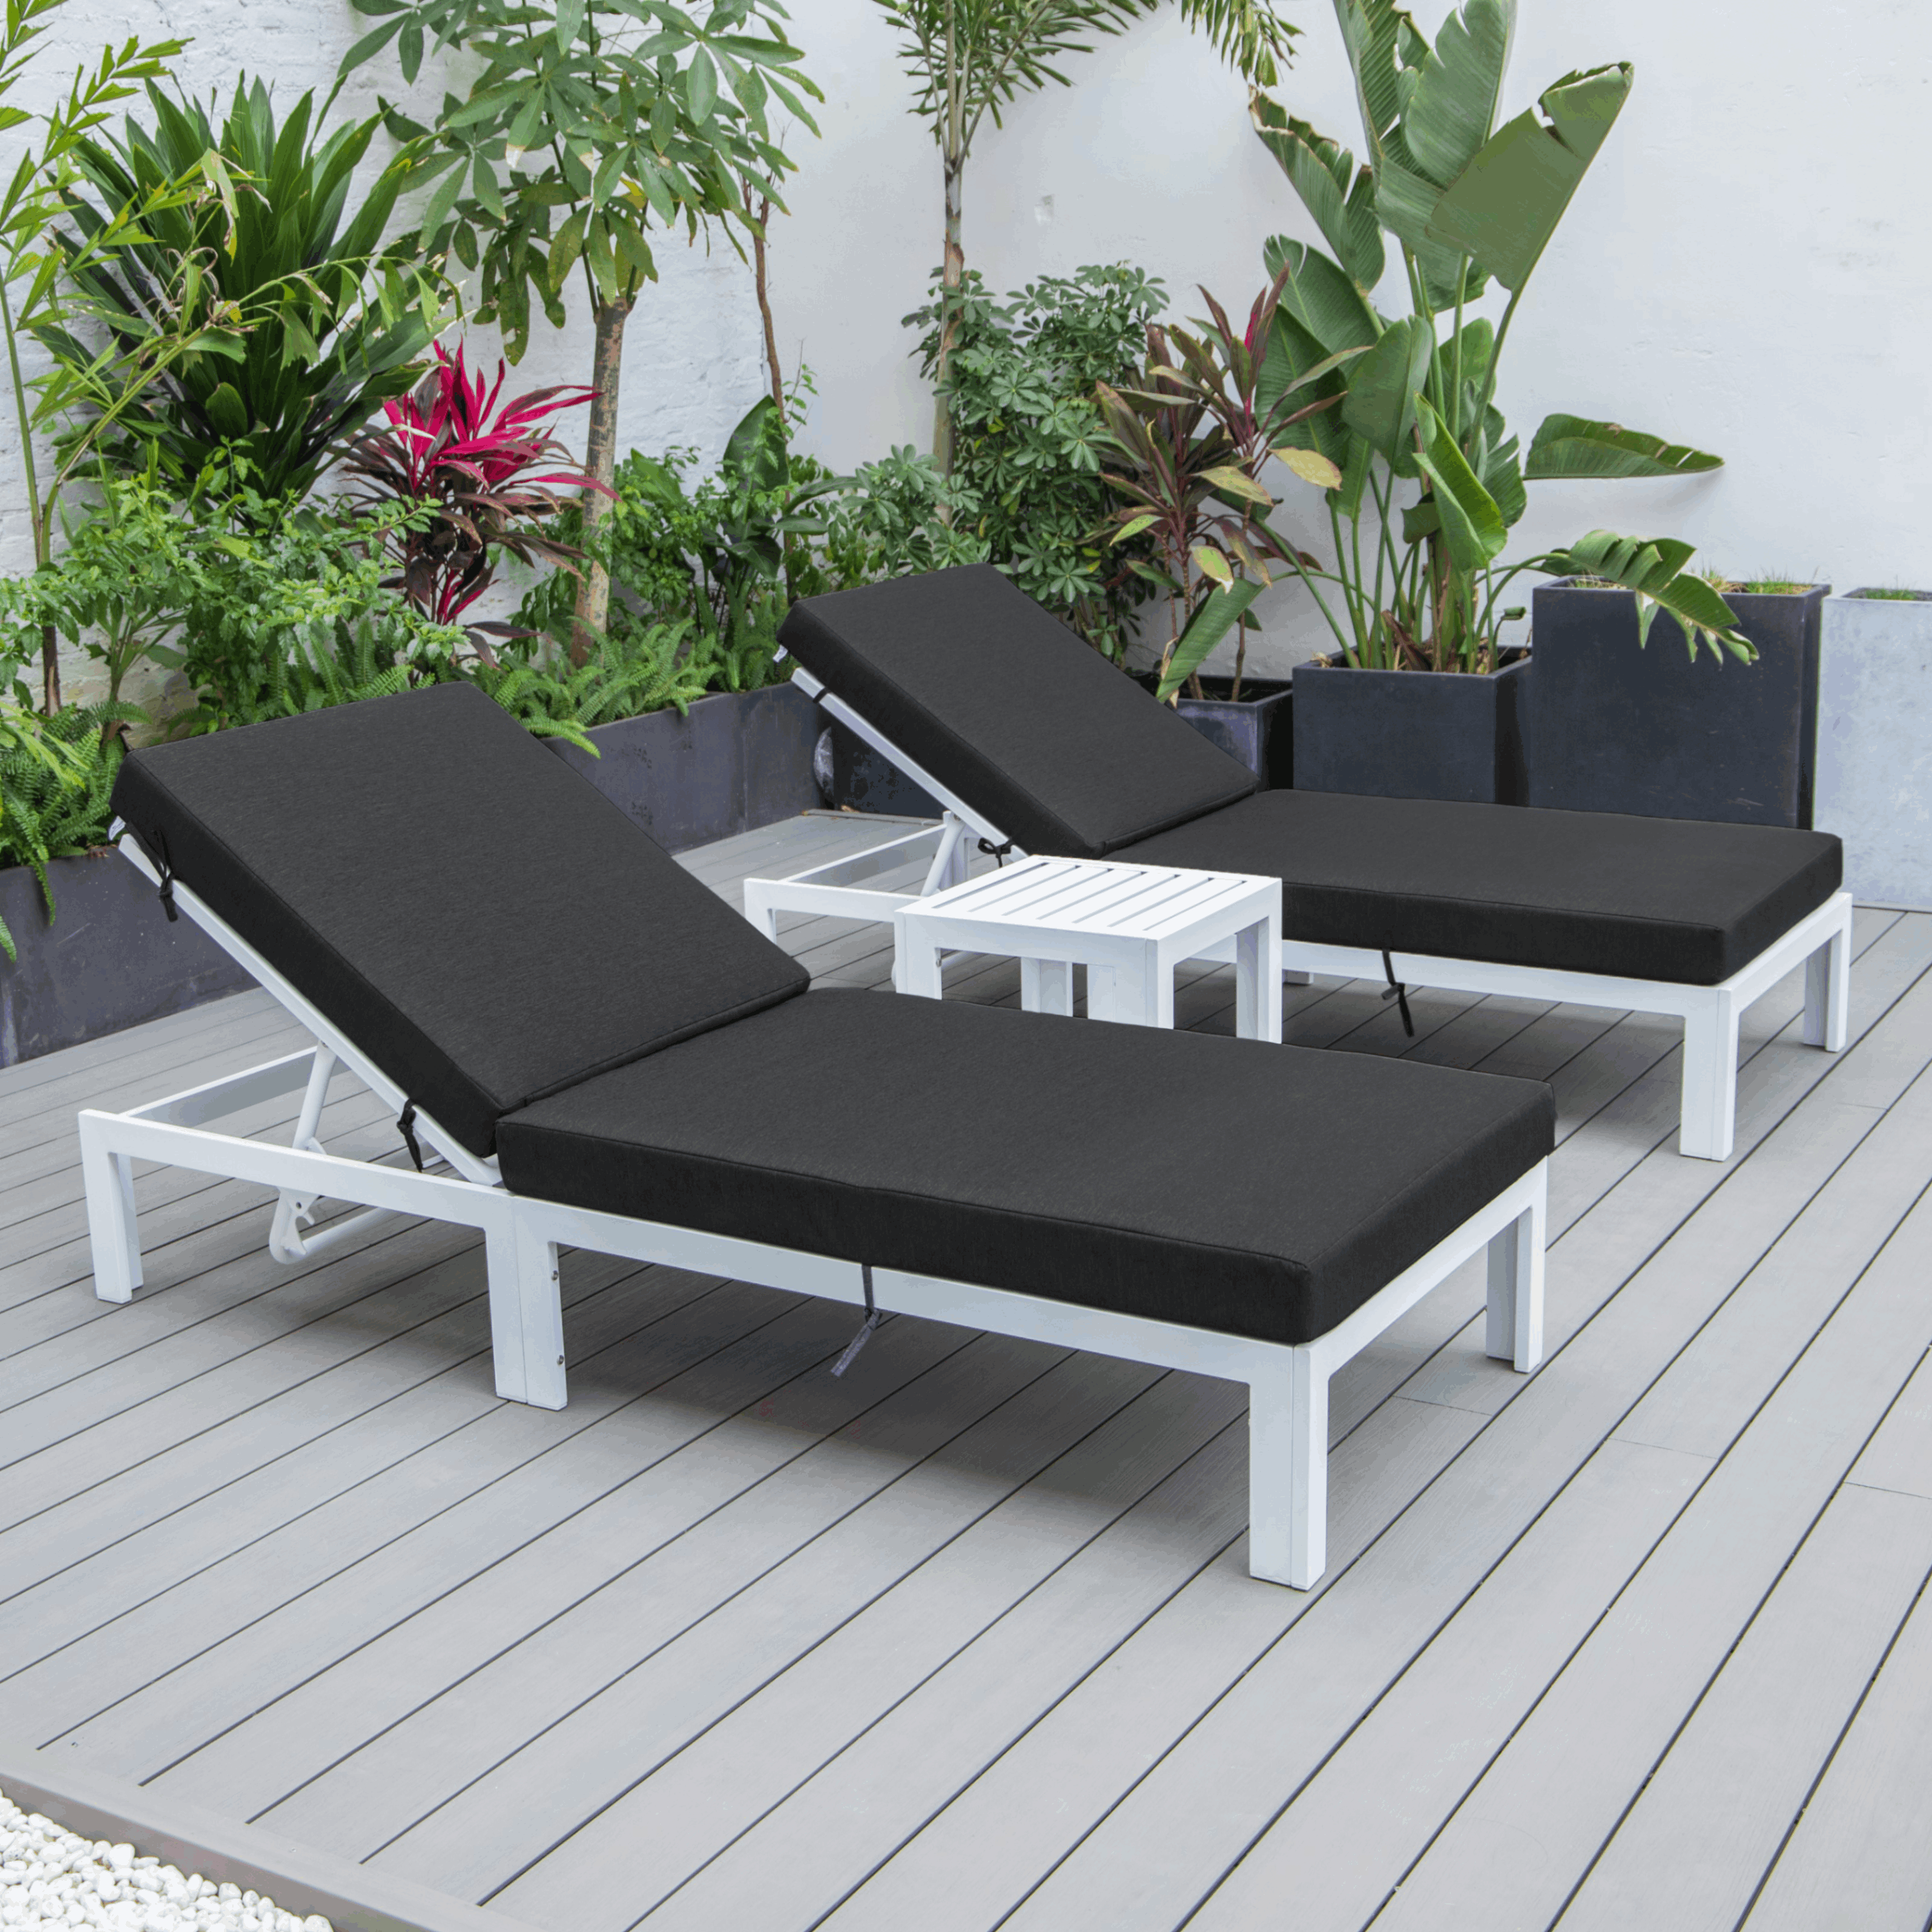 LeisureMod Chelsea Modern White Aluminum Outdoor Chaise Lounge Chair Set of 2 With Side Table & Black Cushions - image 3 of 12